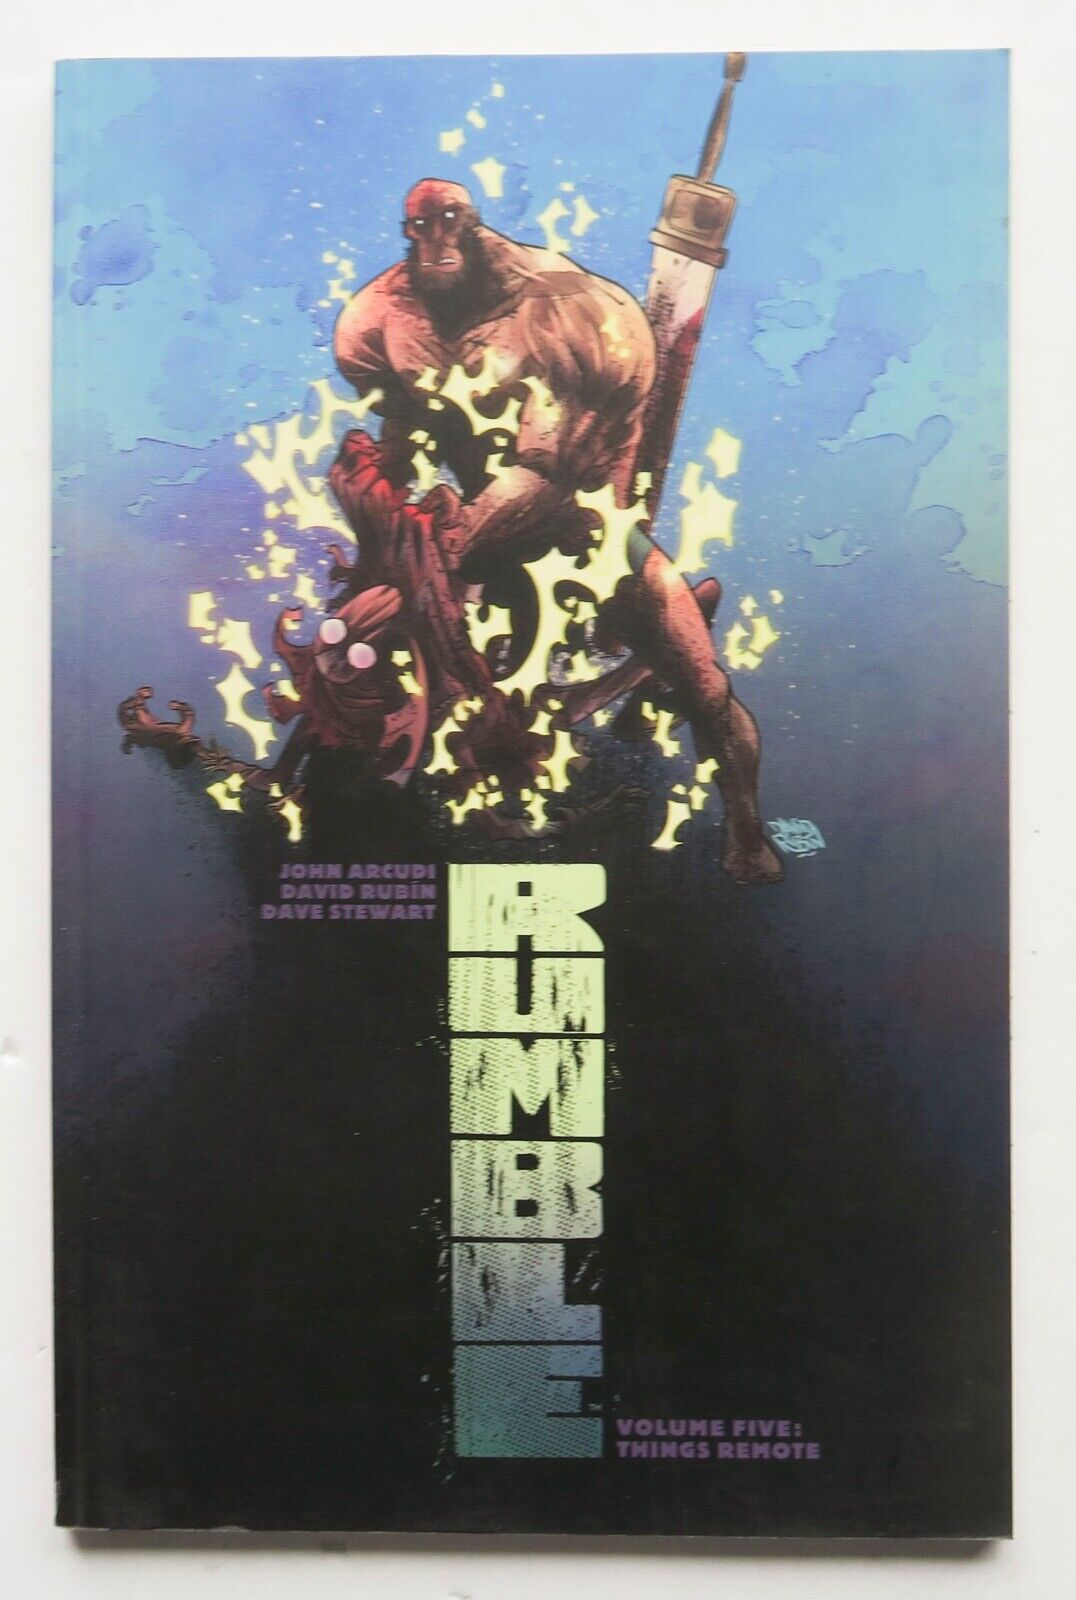 Rumble Vol. 5 Things Remote Image Graphic Novel Comic Book